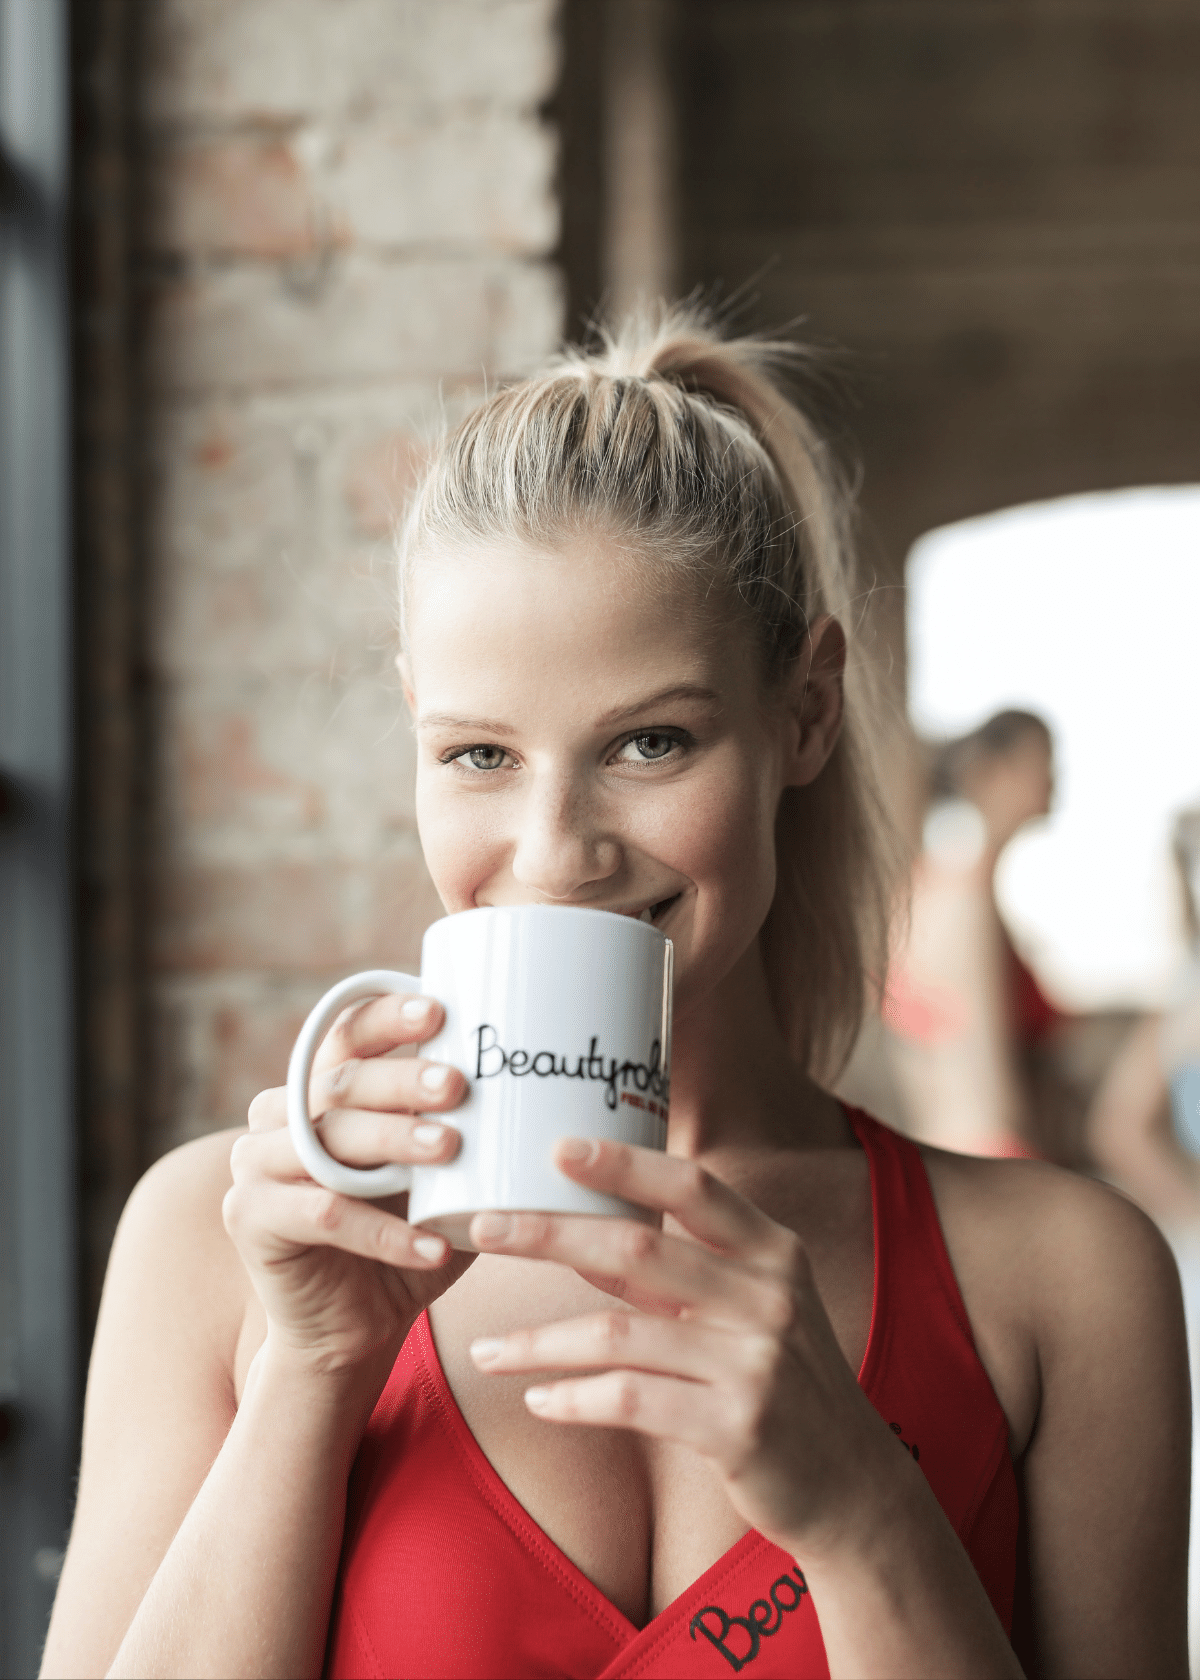 Best Tea To Drink For Weight Loss: Top 3 Teas Recommended by Experts! | Best Life At Large